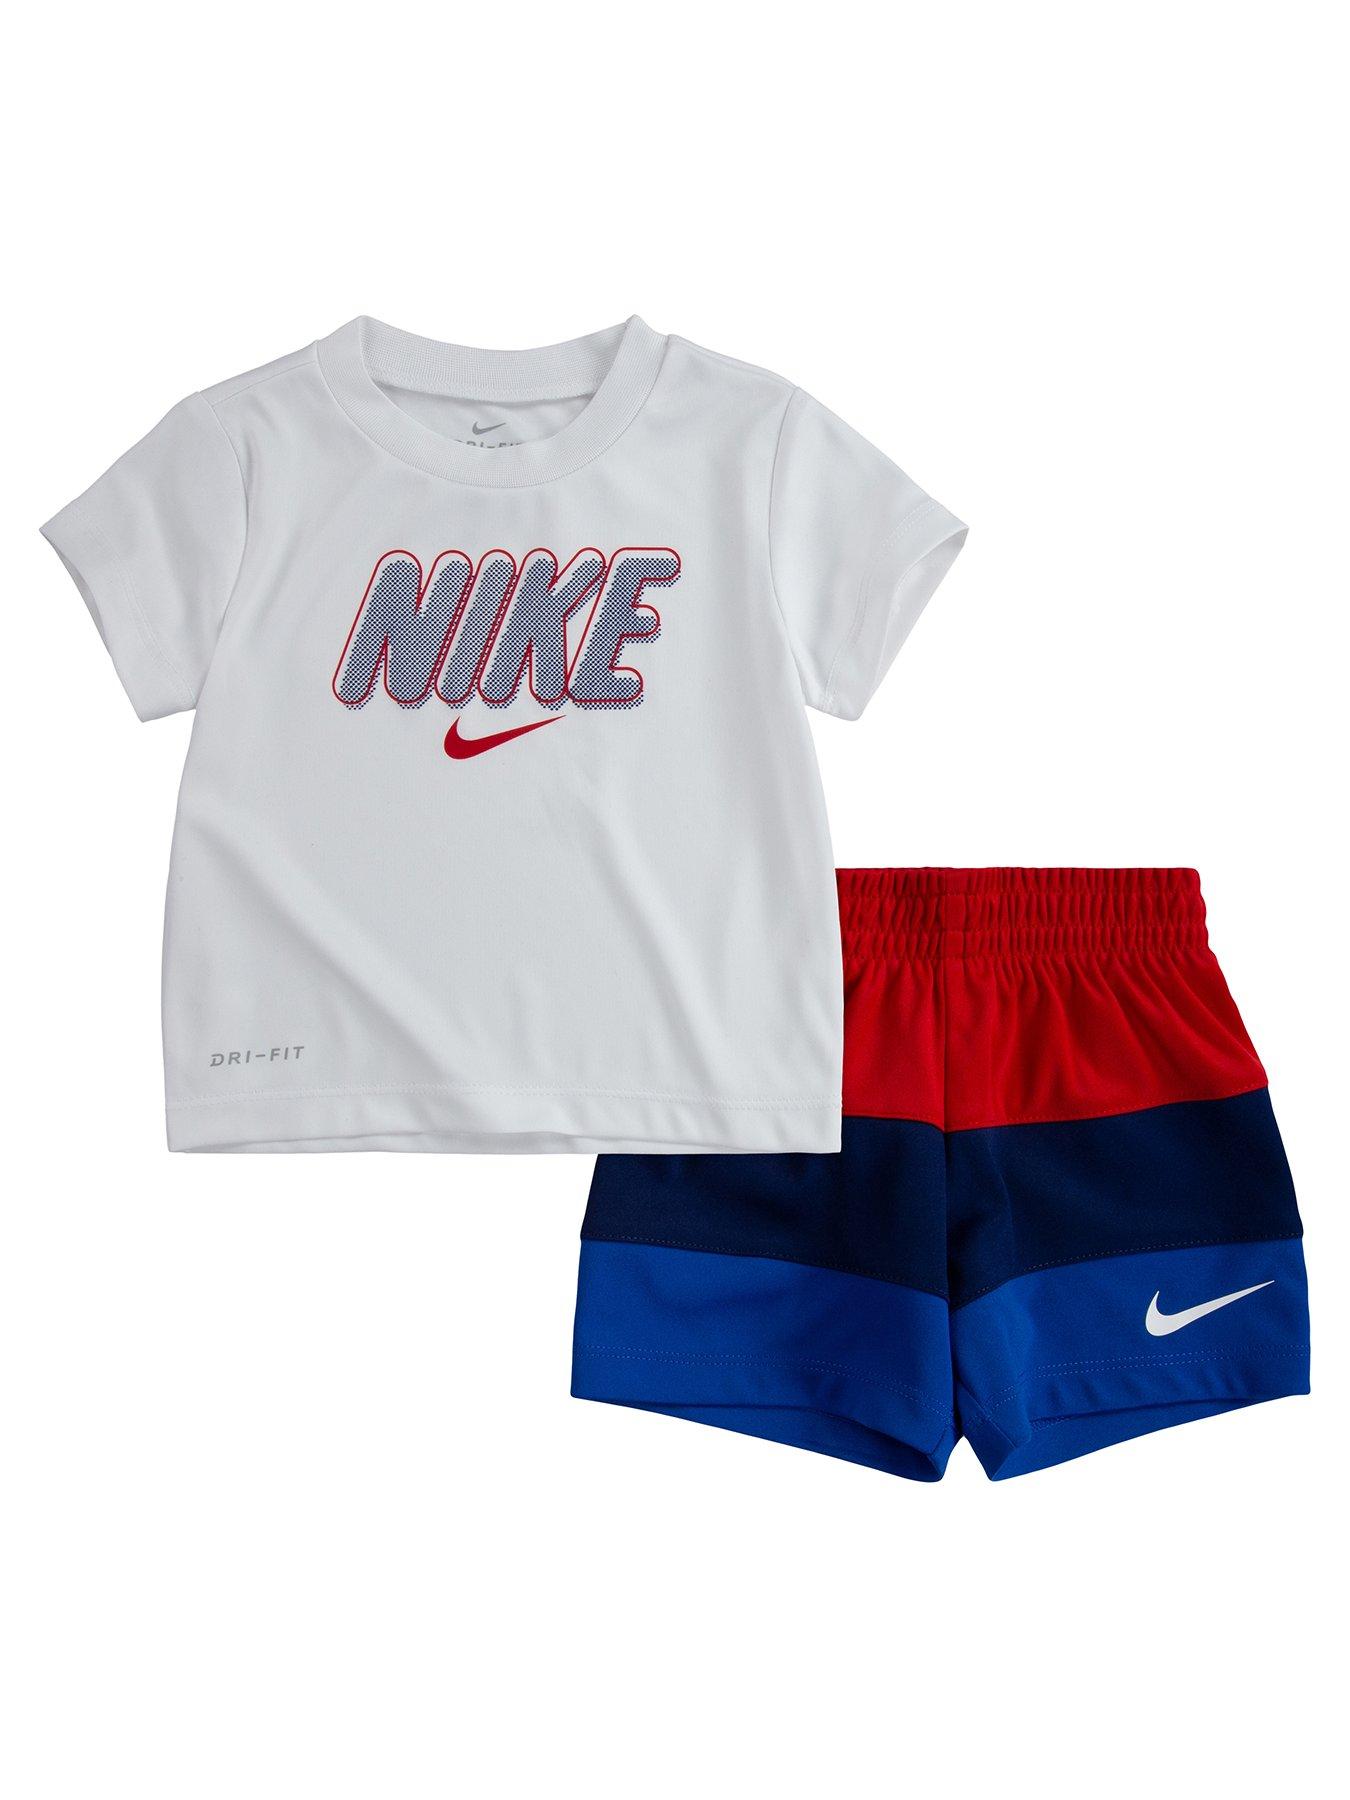 Baby Clothes Younger Boy Dri-FIT Short Sleeved T-shirt & Blocked Short Set - Multi